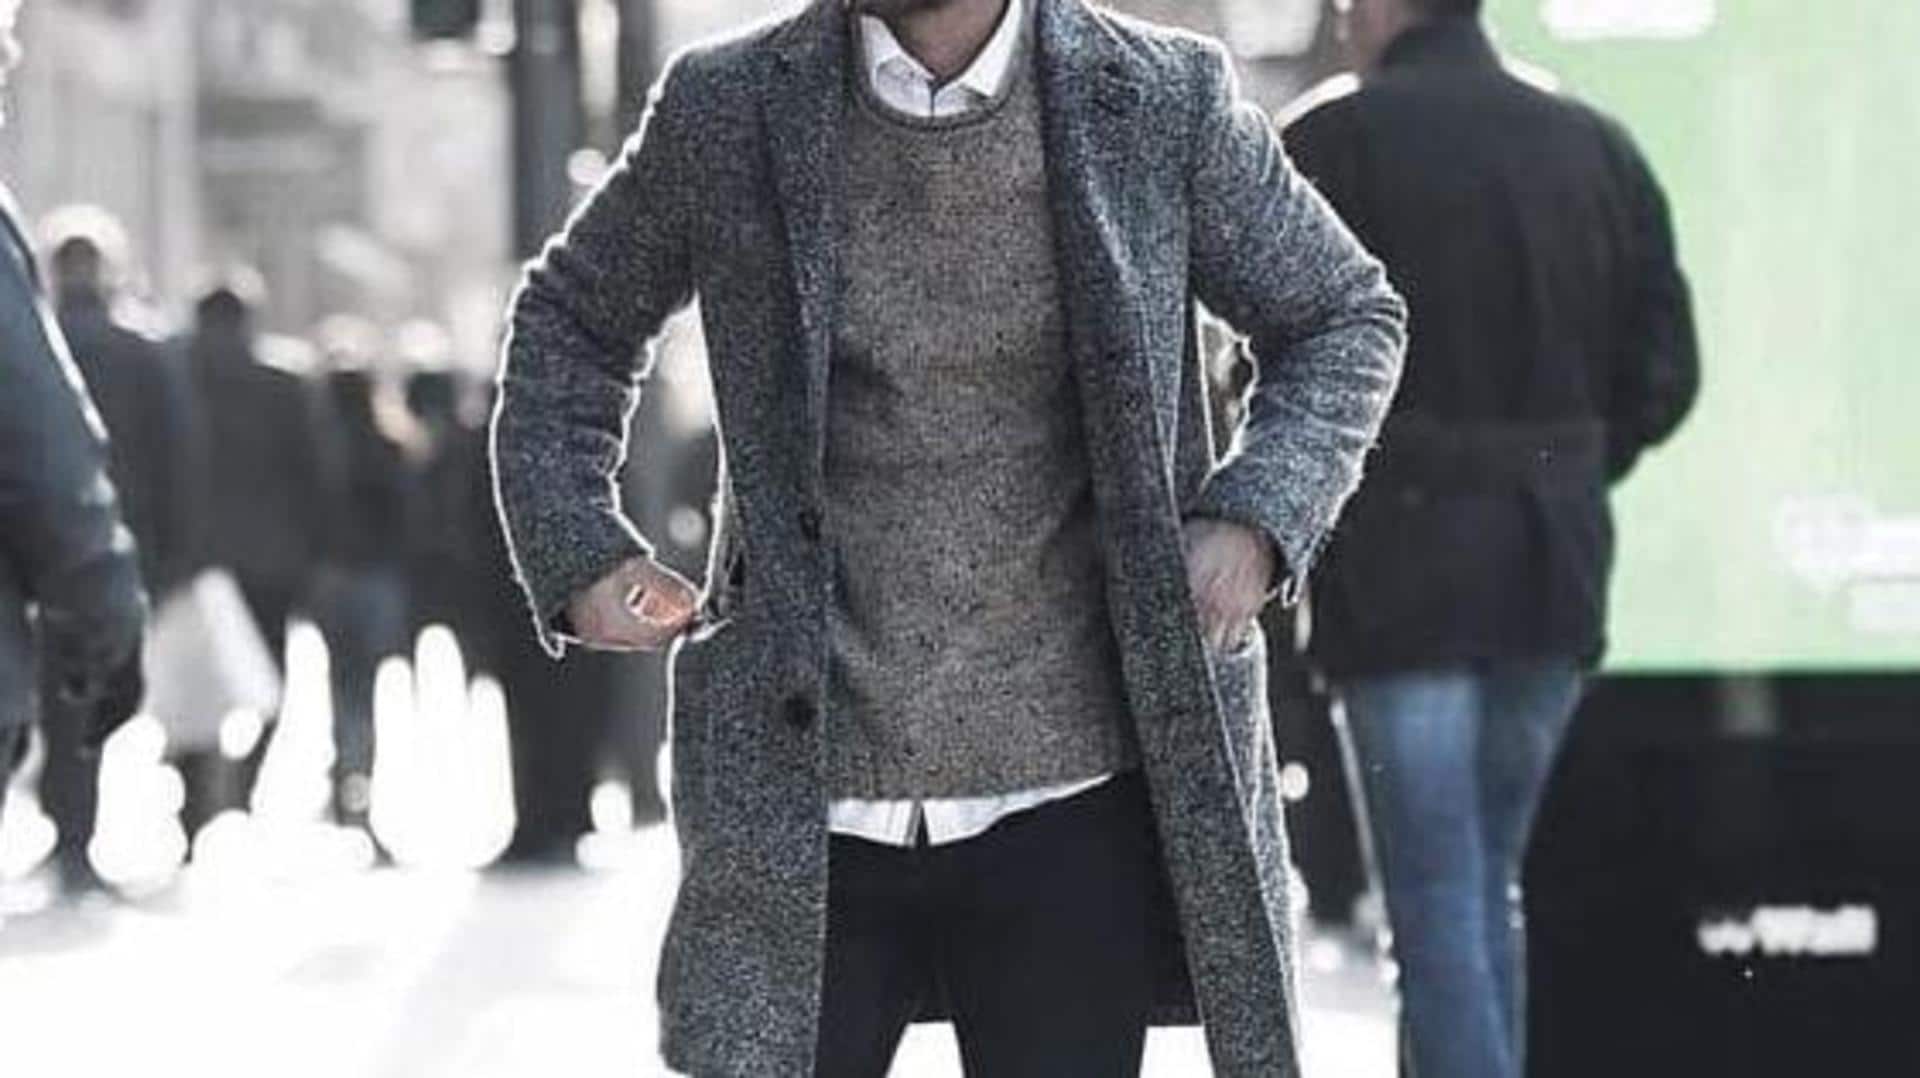 Men's winter fashion trends: Bundle up with style